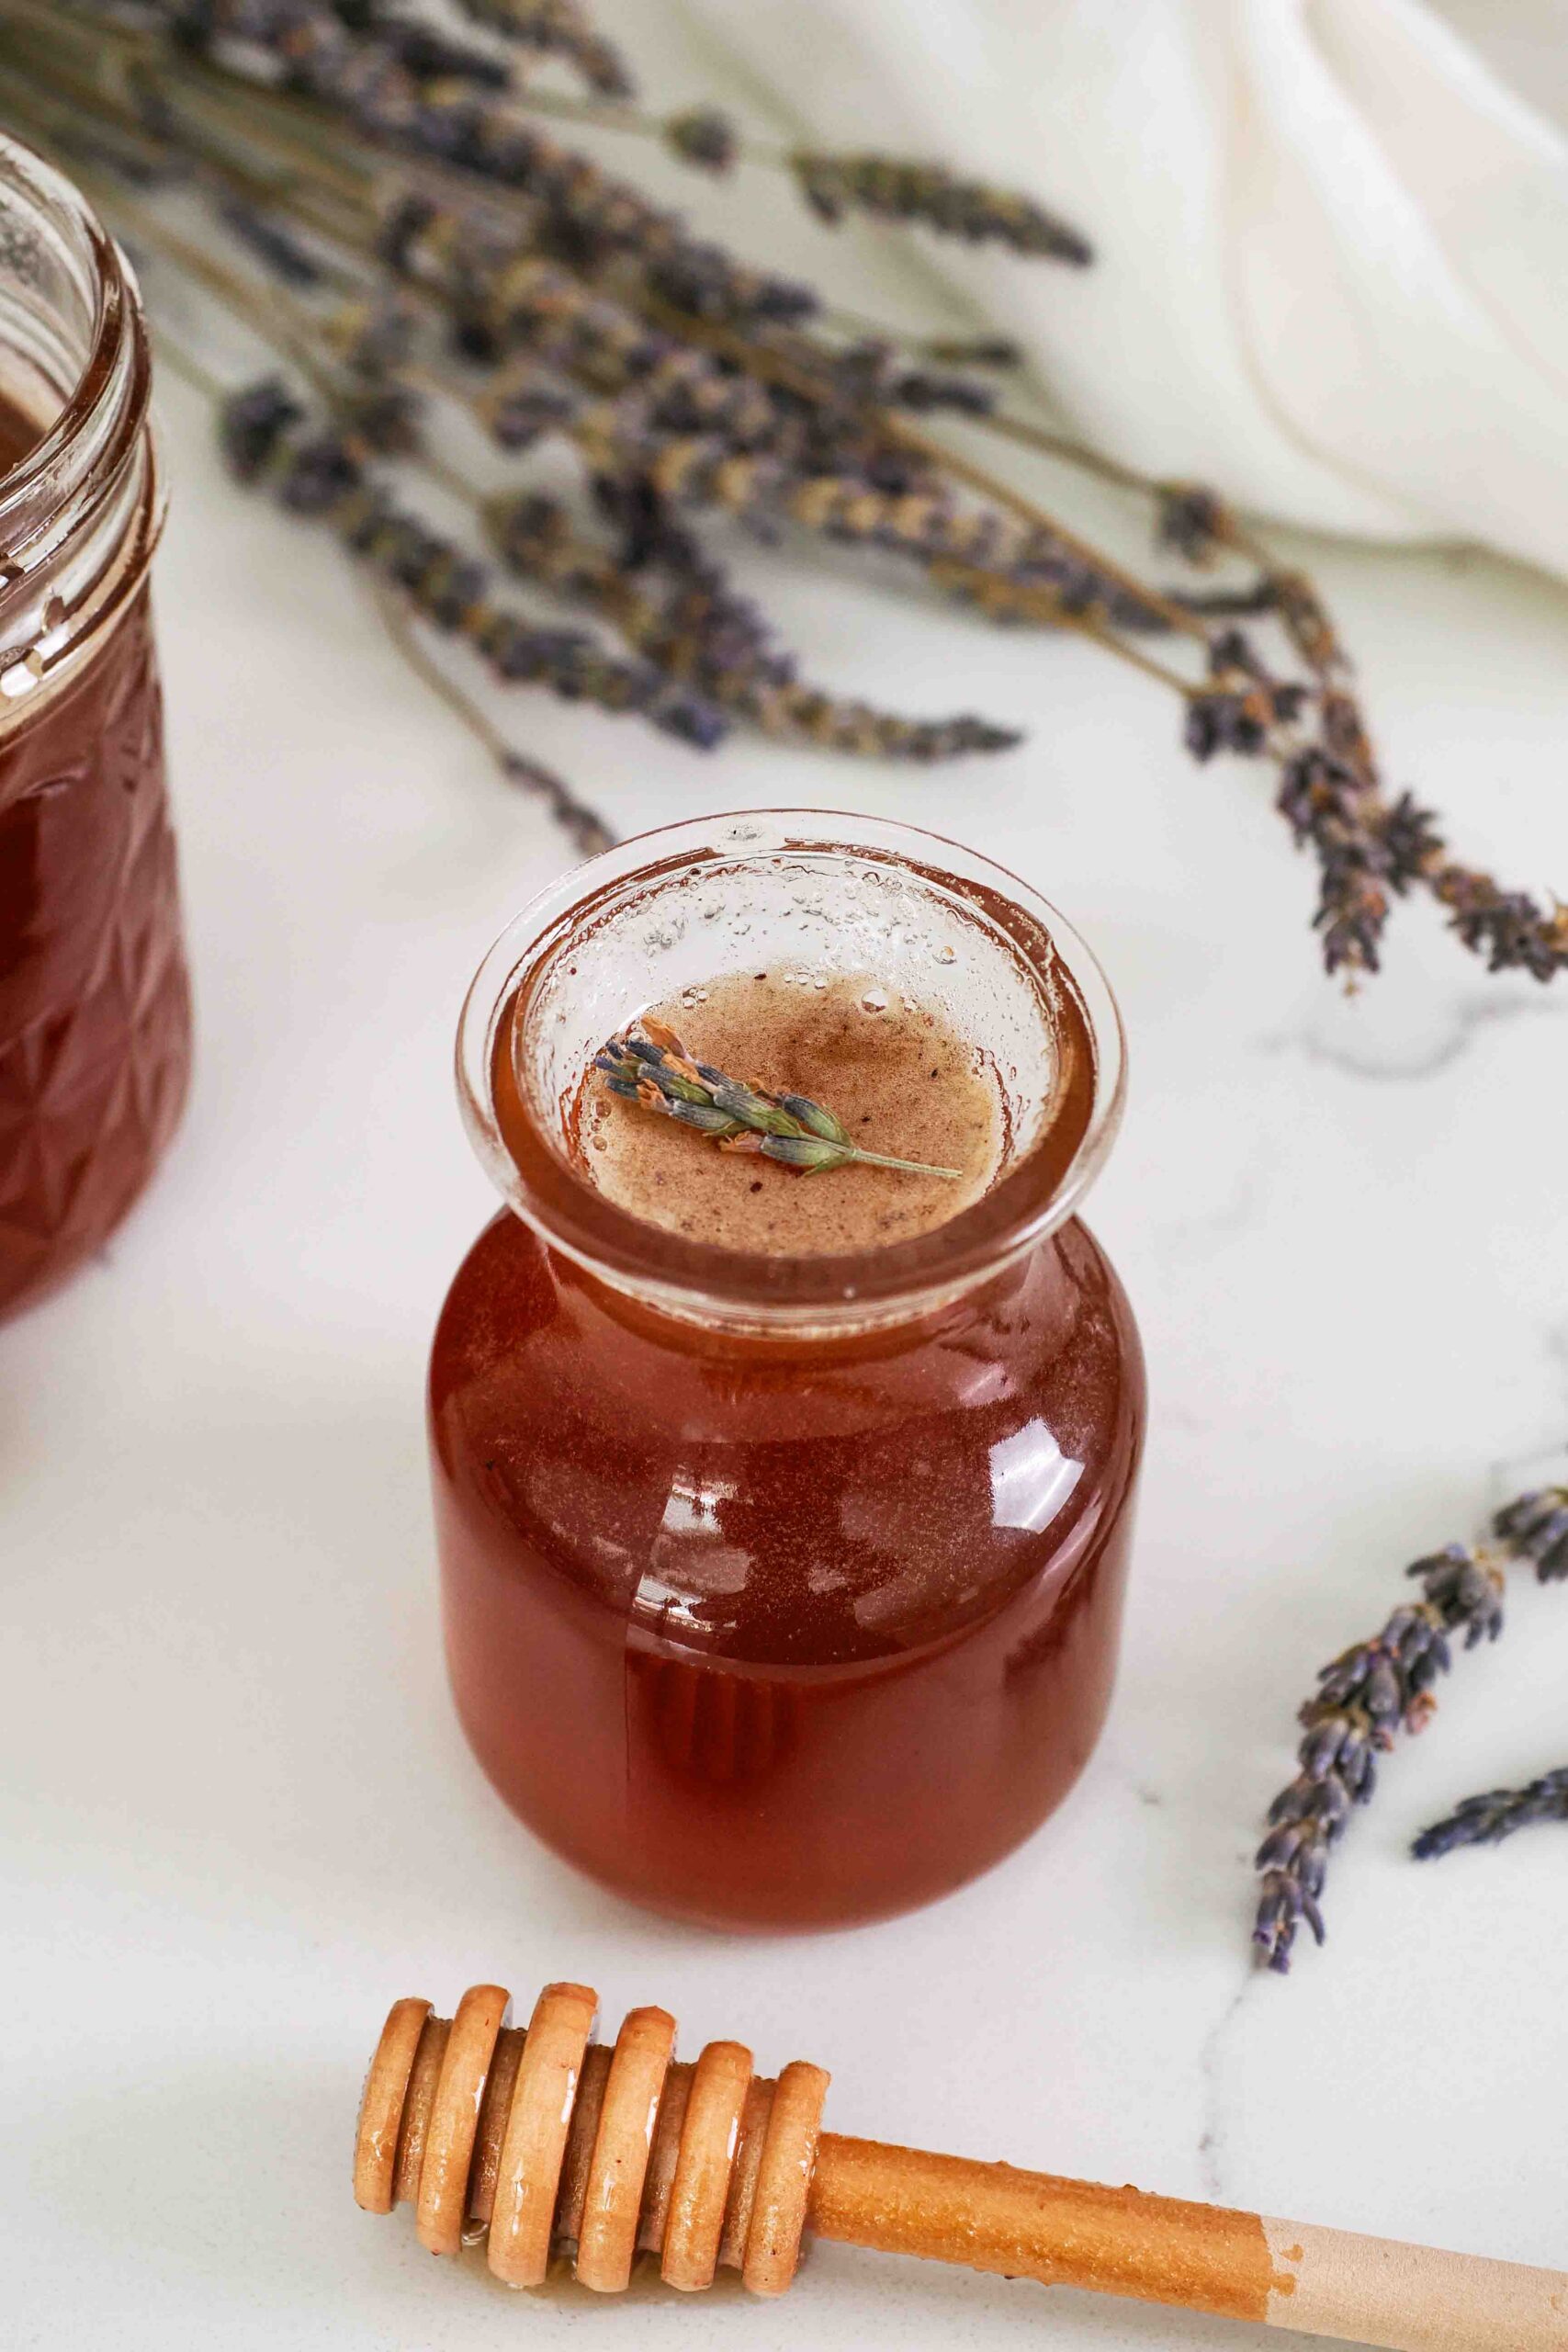 Closeup of a small bottle of honey lavender syrup with a honey dipper.